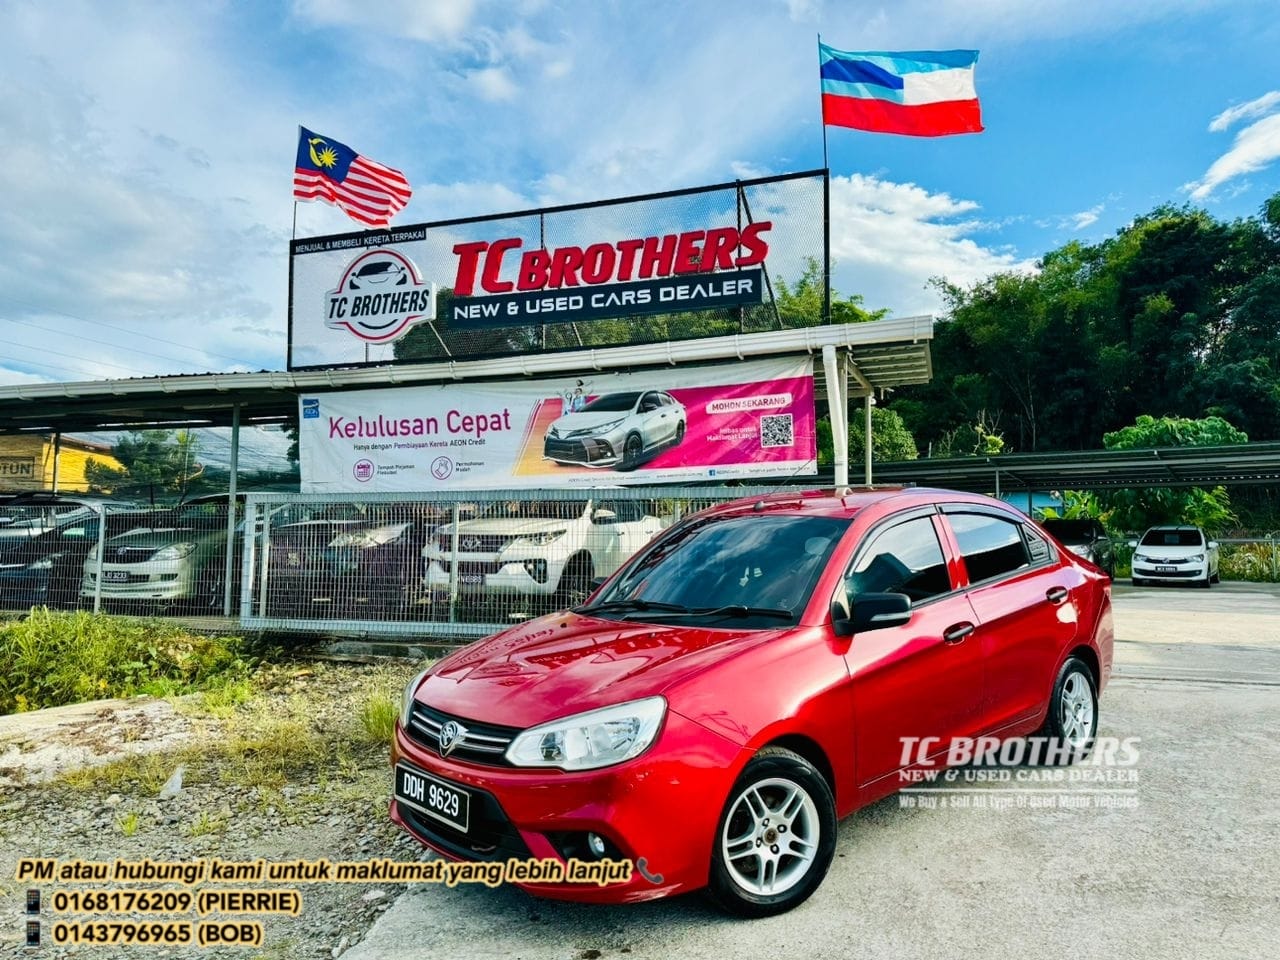 TC BROTHERS NEW & USED CARS DEALER